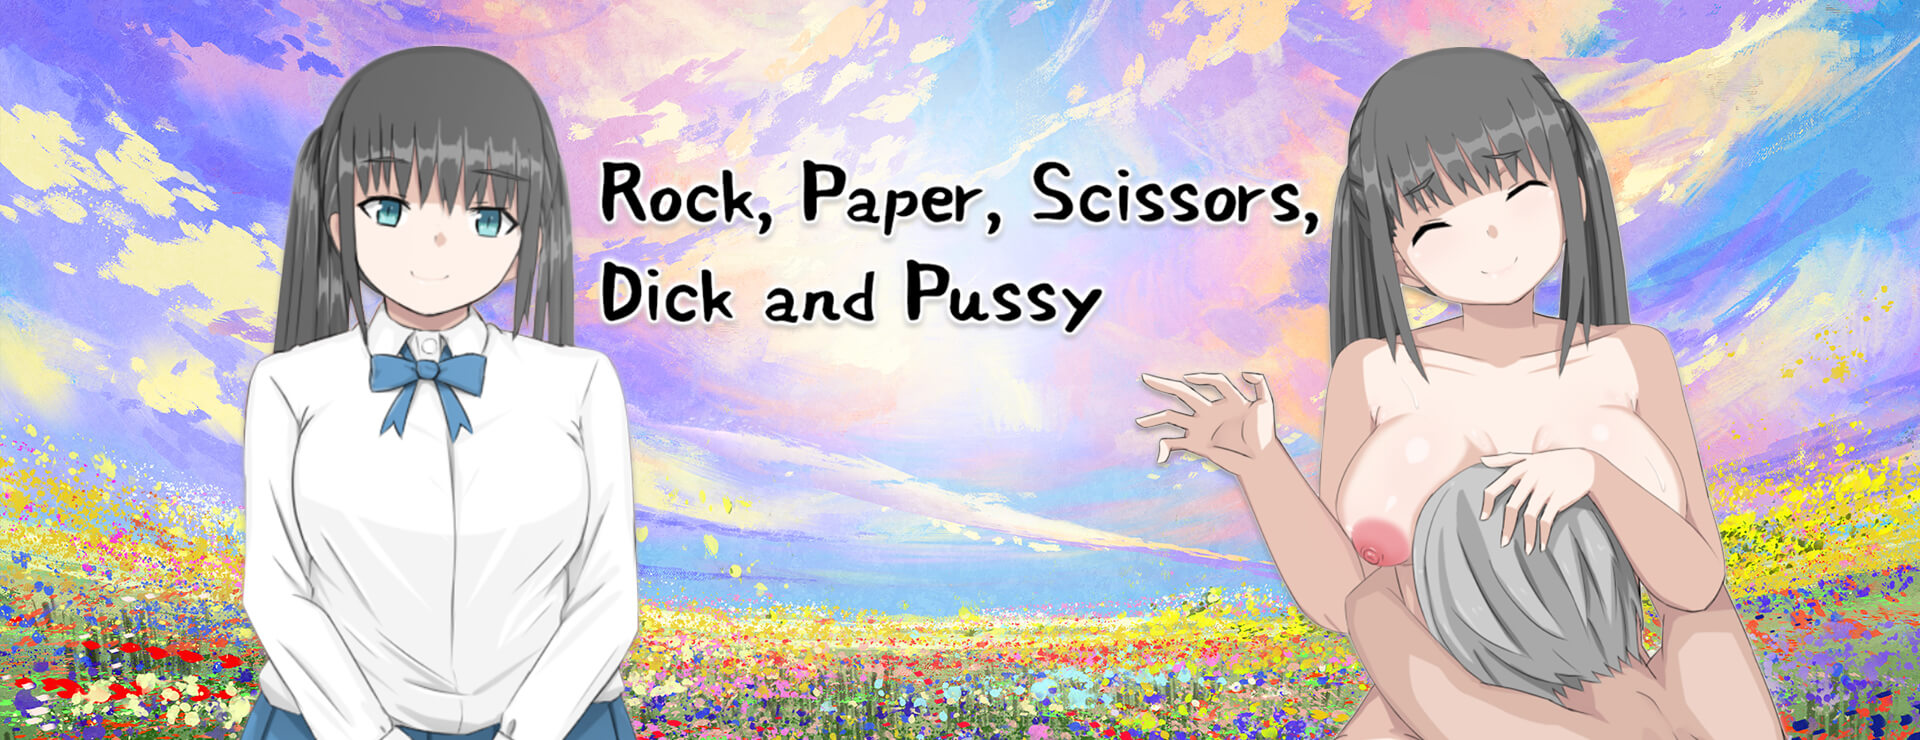 Rock, Paper, Scissors, Dick and Pussy - Zwanglos  Spiel